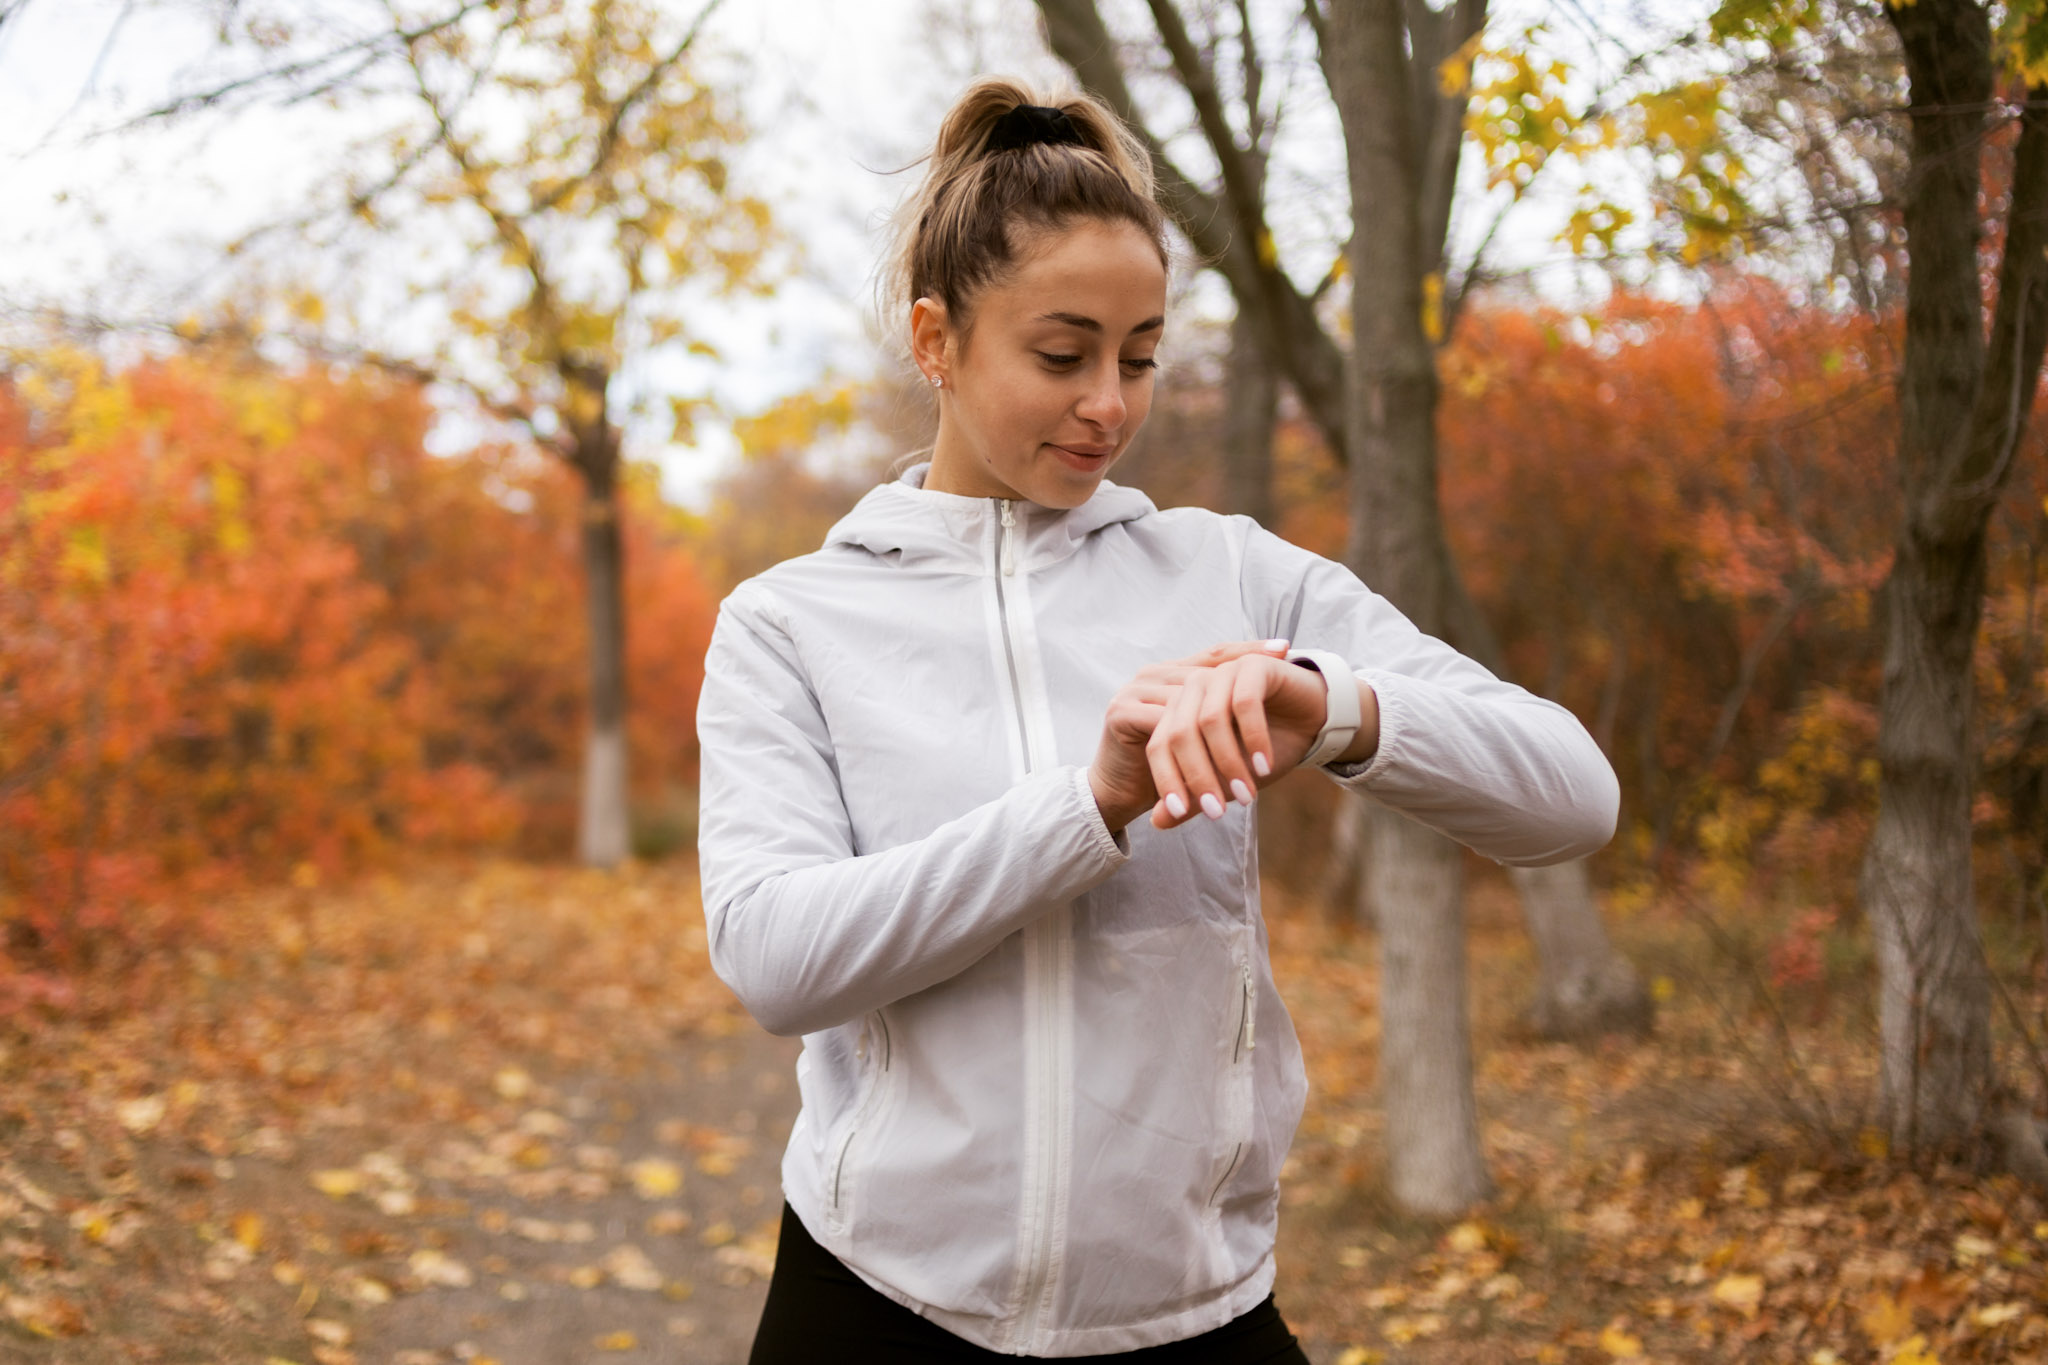 stock photo of a woman using a smart watch in an autumnal forest